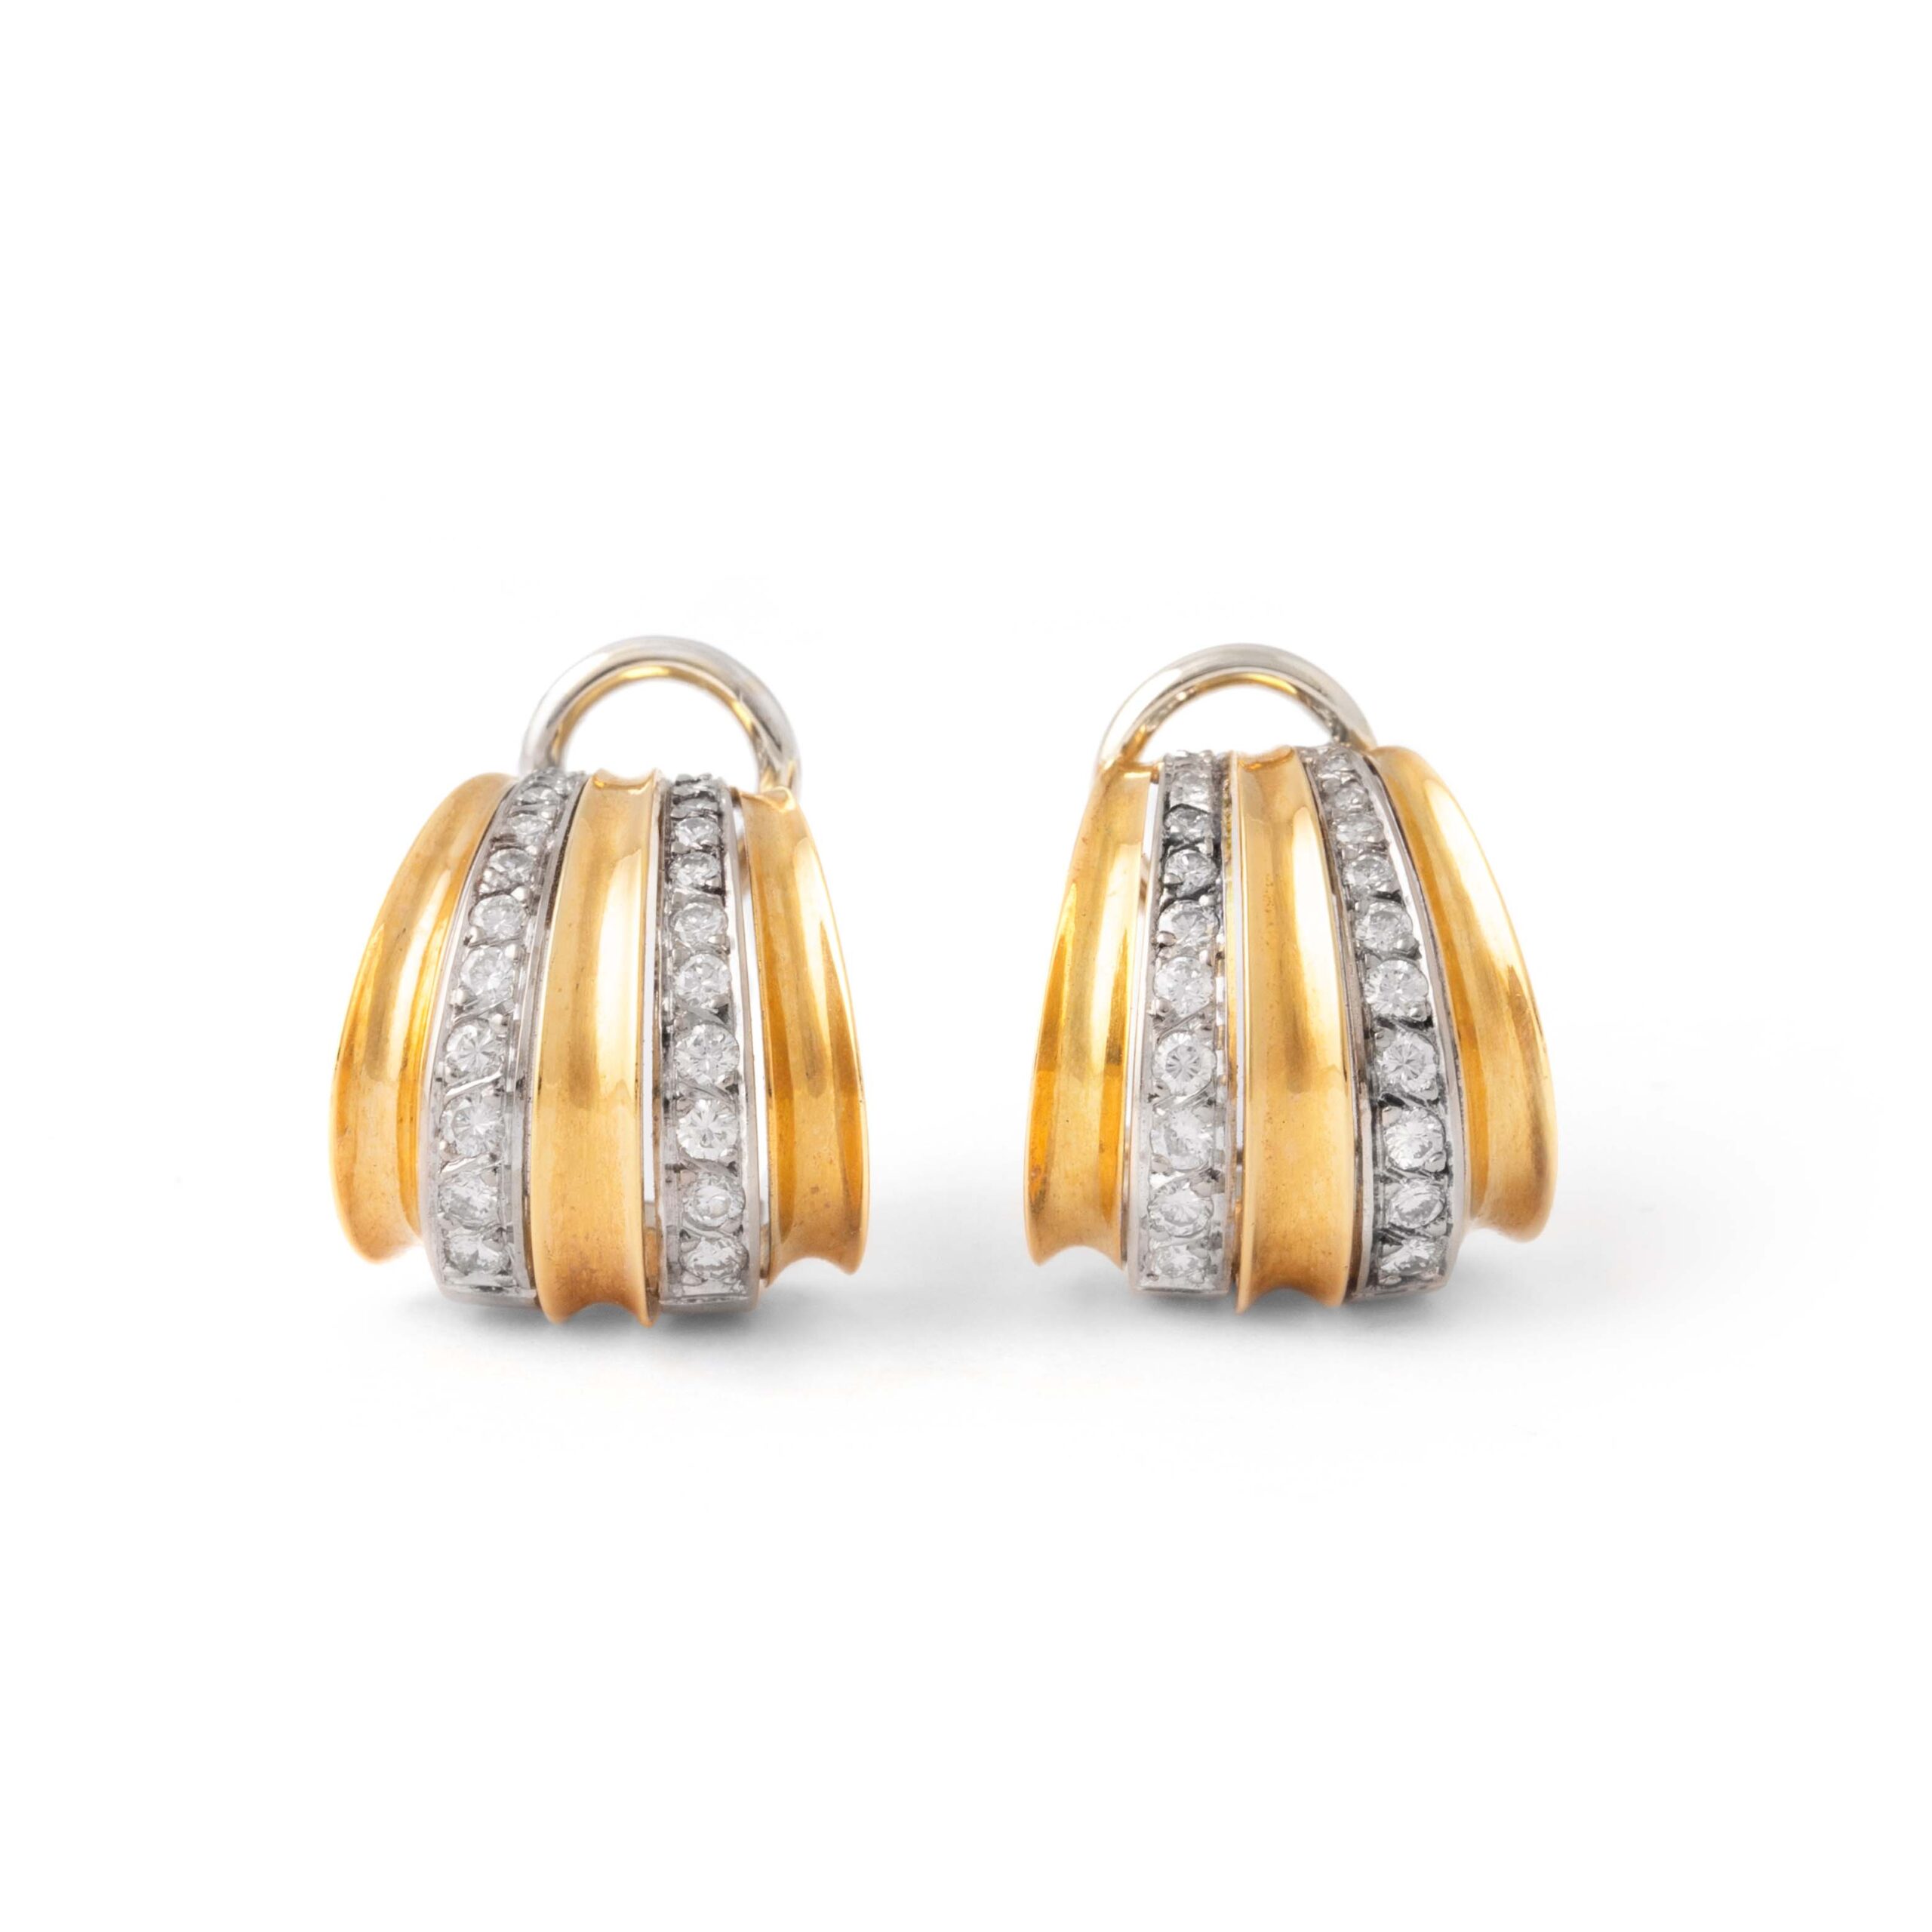 Radiate elegance with these exquisite Diamond 18K Yellow and White Gold Earrings. Each earring features a stunning 0.78-carat diamond, boasting an H color and VS clarity. A harmonious blend of timeless luxury and impeccable craftsmanship.